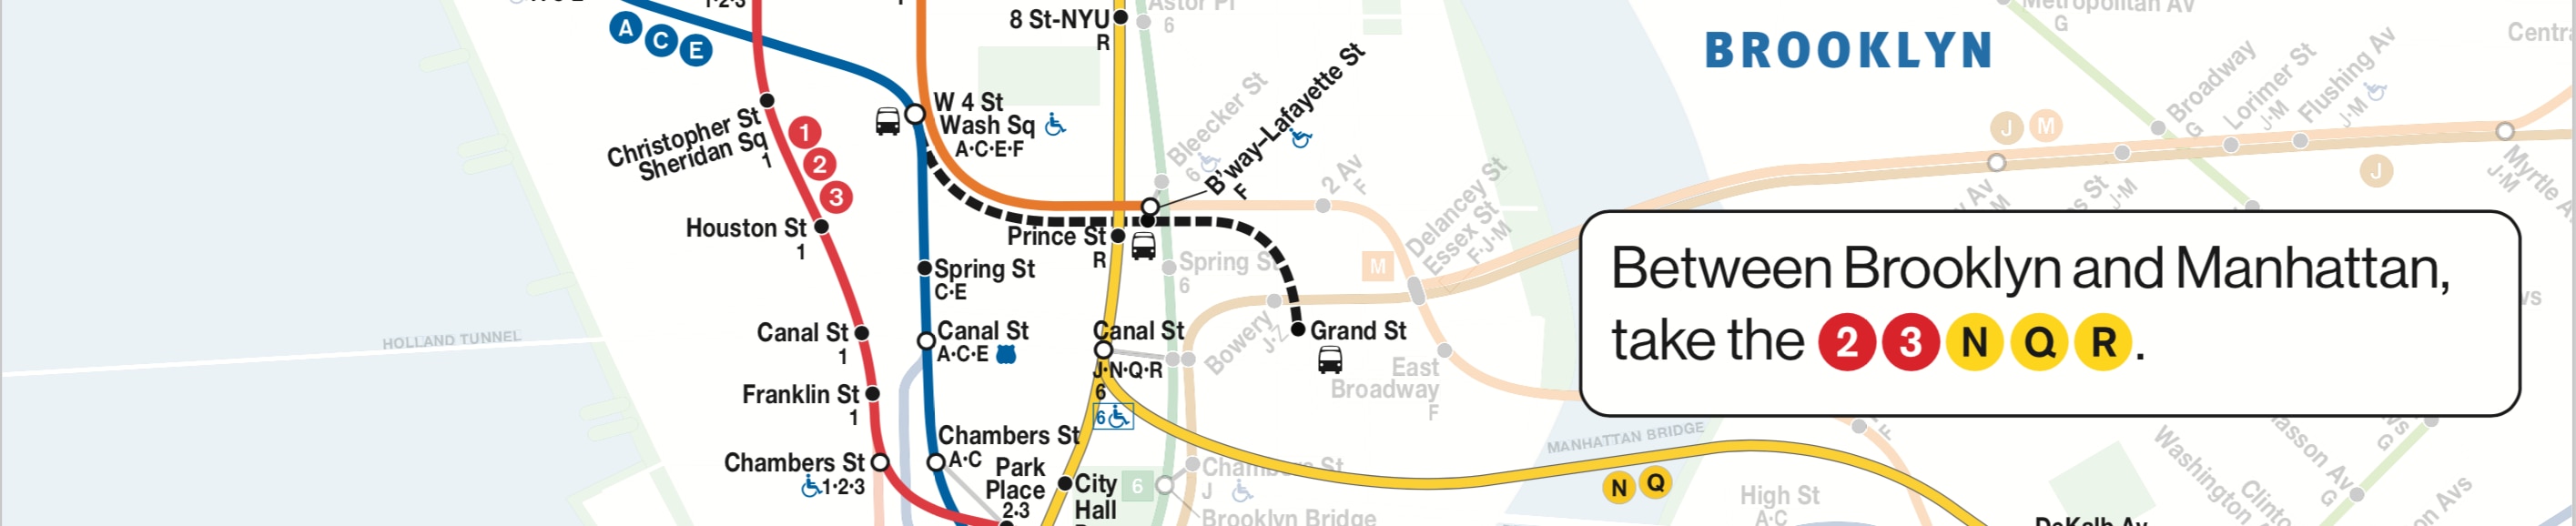 How to get to French Consulate in Manhattan by Subway, Bus or Train?